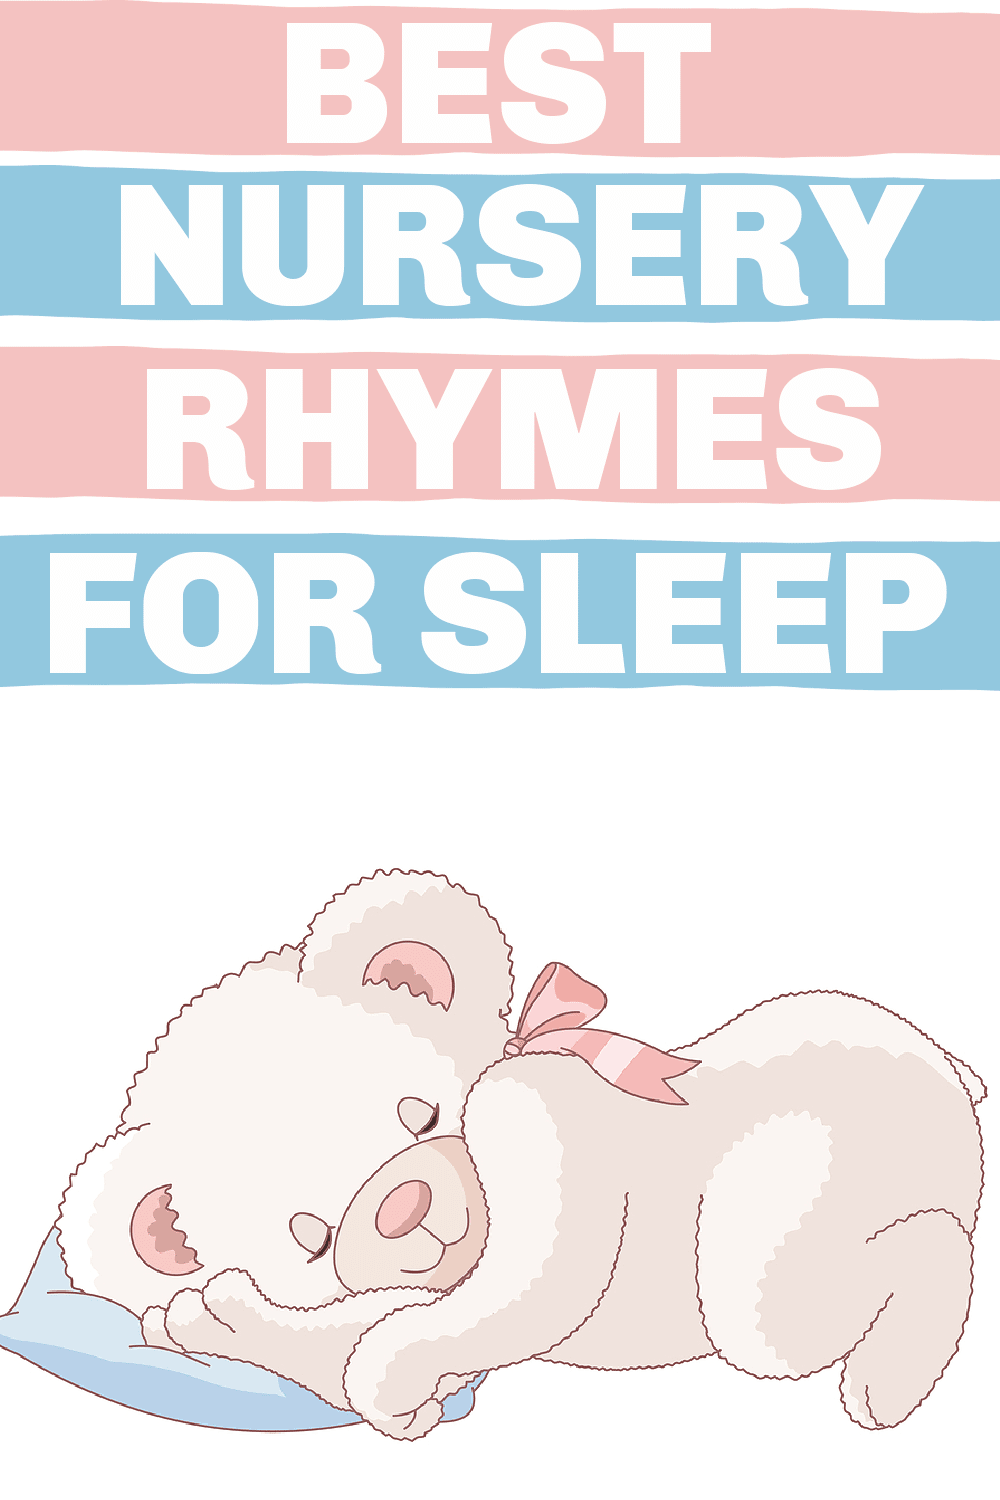 9 Nursery Rhymes About Sleep for Toddlers and Preschoolers - Empowered  Parents